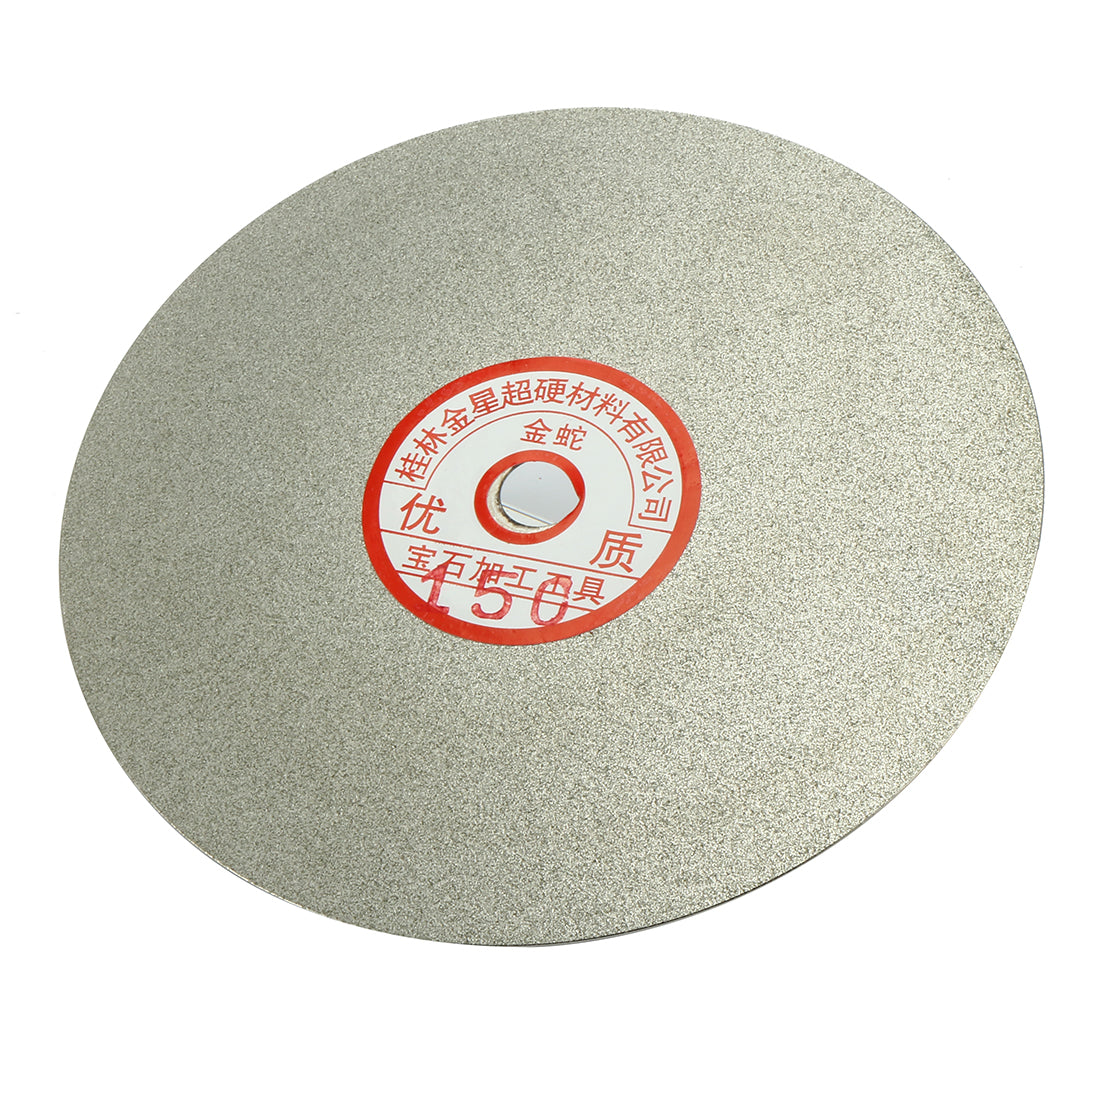 uxcell Uxcell 6-inch Grit 150 Diamond Coated Flat Lap Wheel Grinding Sanding Polishing Disc